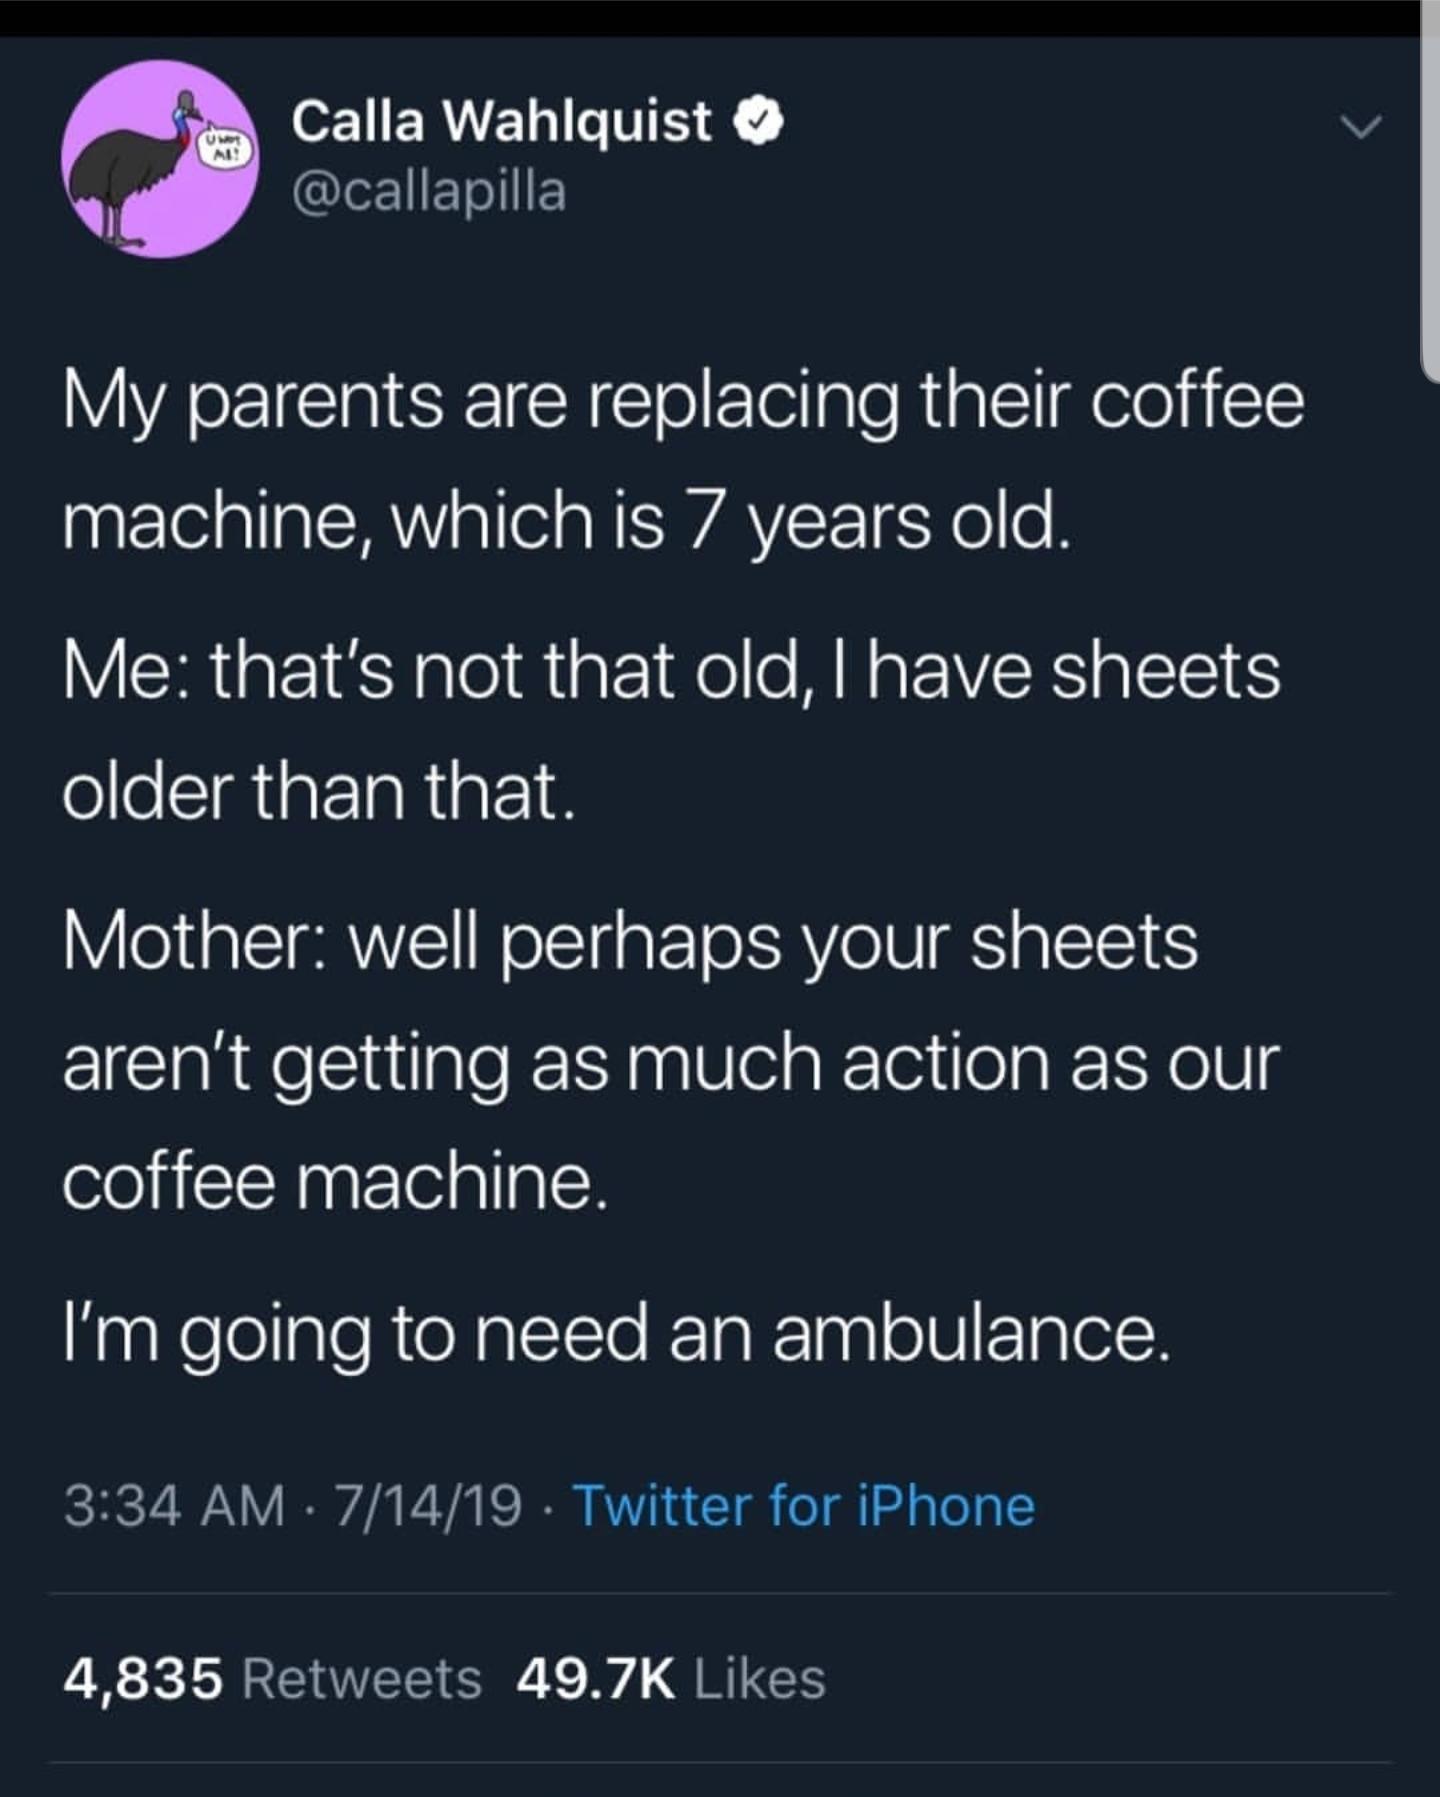 Umet Al Calla Wahlquist My parents are replacing their coffee machine, which is 7 years old. Me that's not that old, I have sheets older than that. Mother well perhaps your sheets aren't getting as much action as our coffee machine. I'm going